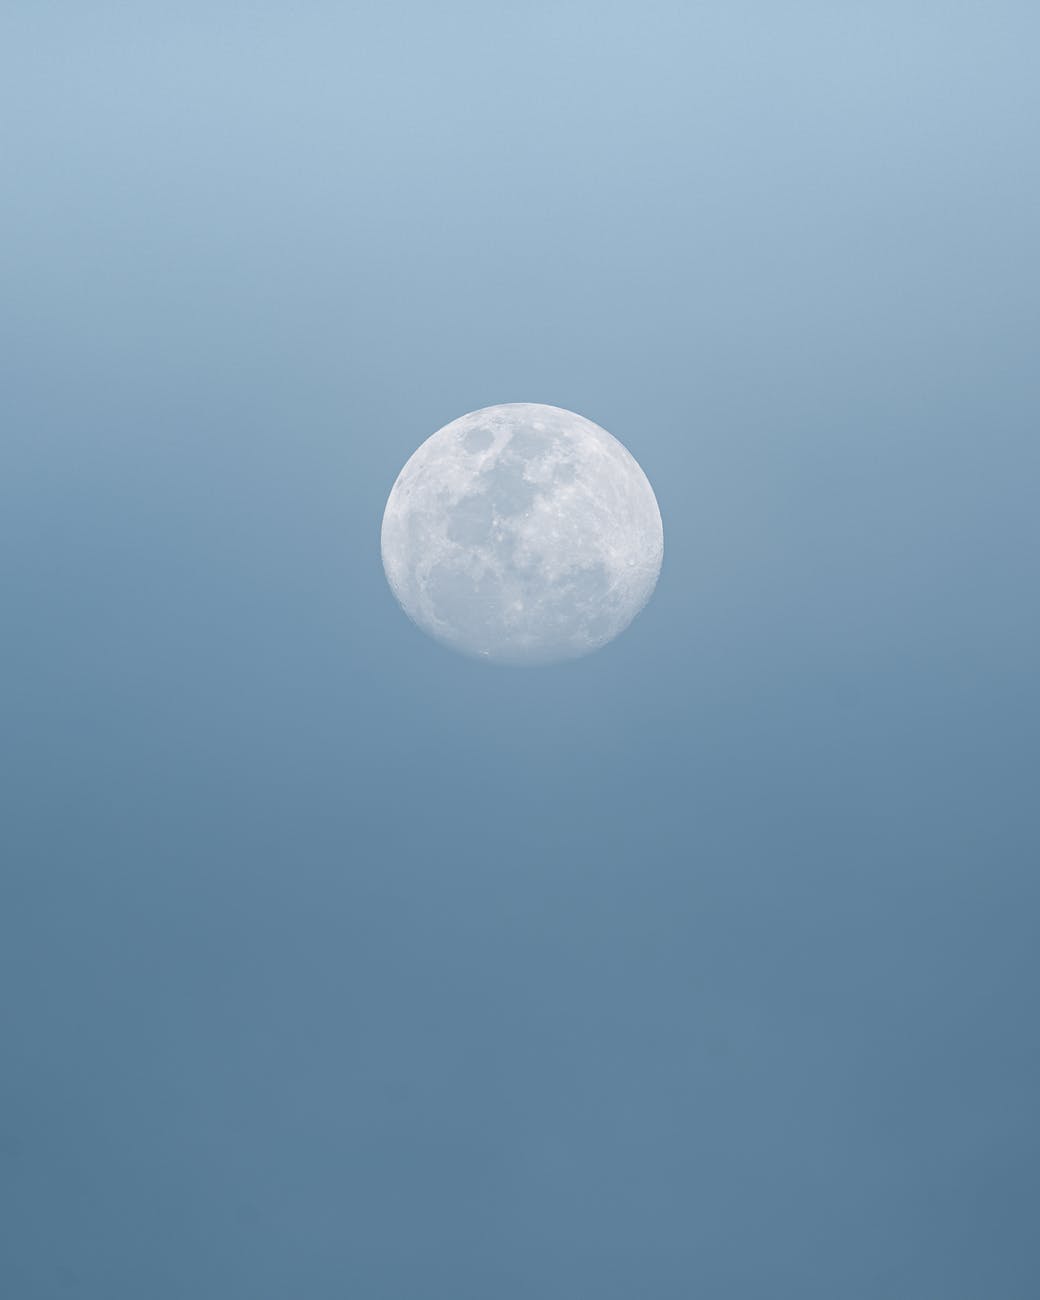 moon on blue sky in nature